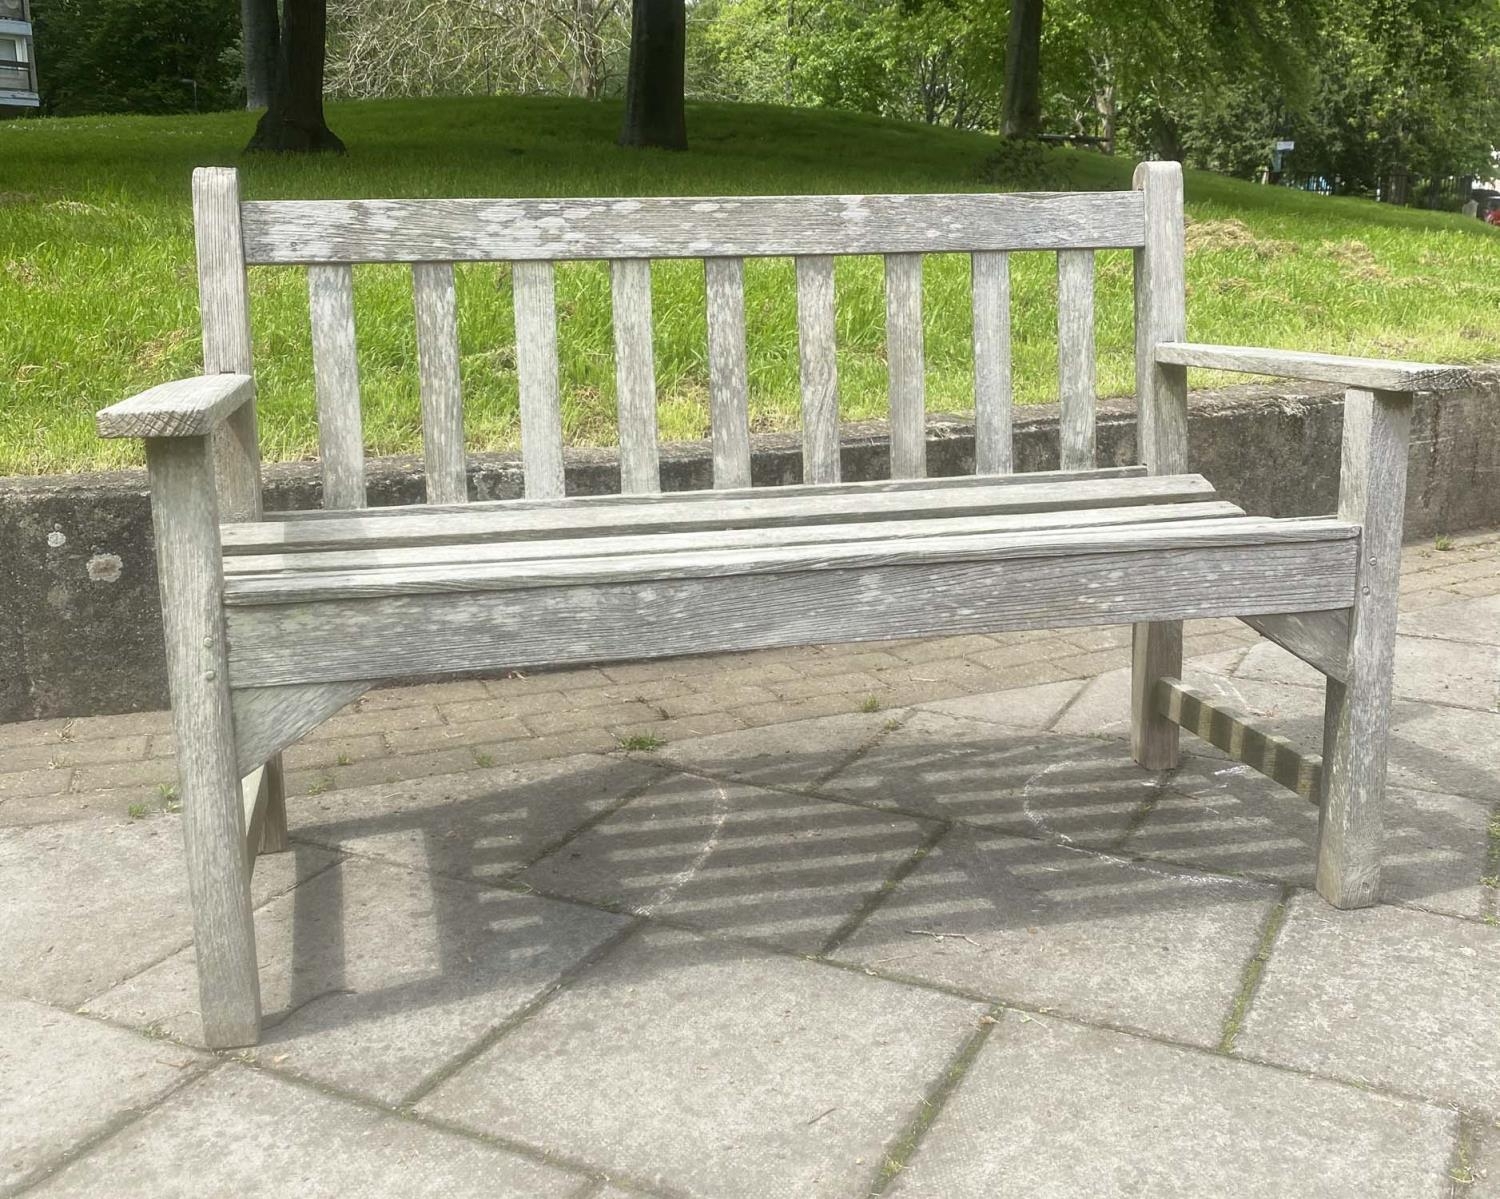 LISTER GARDEN BENCH, silvery weathered teak of slatted construction with flat top arms by R A Lister